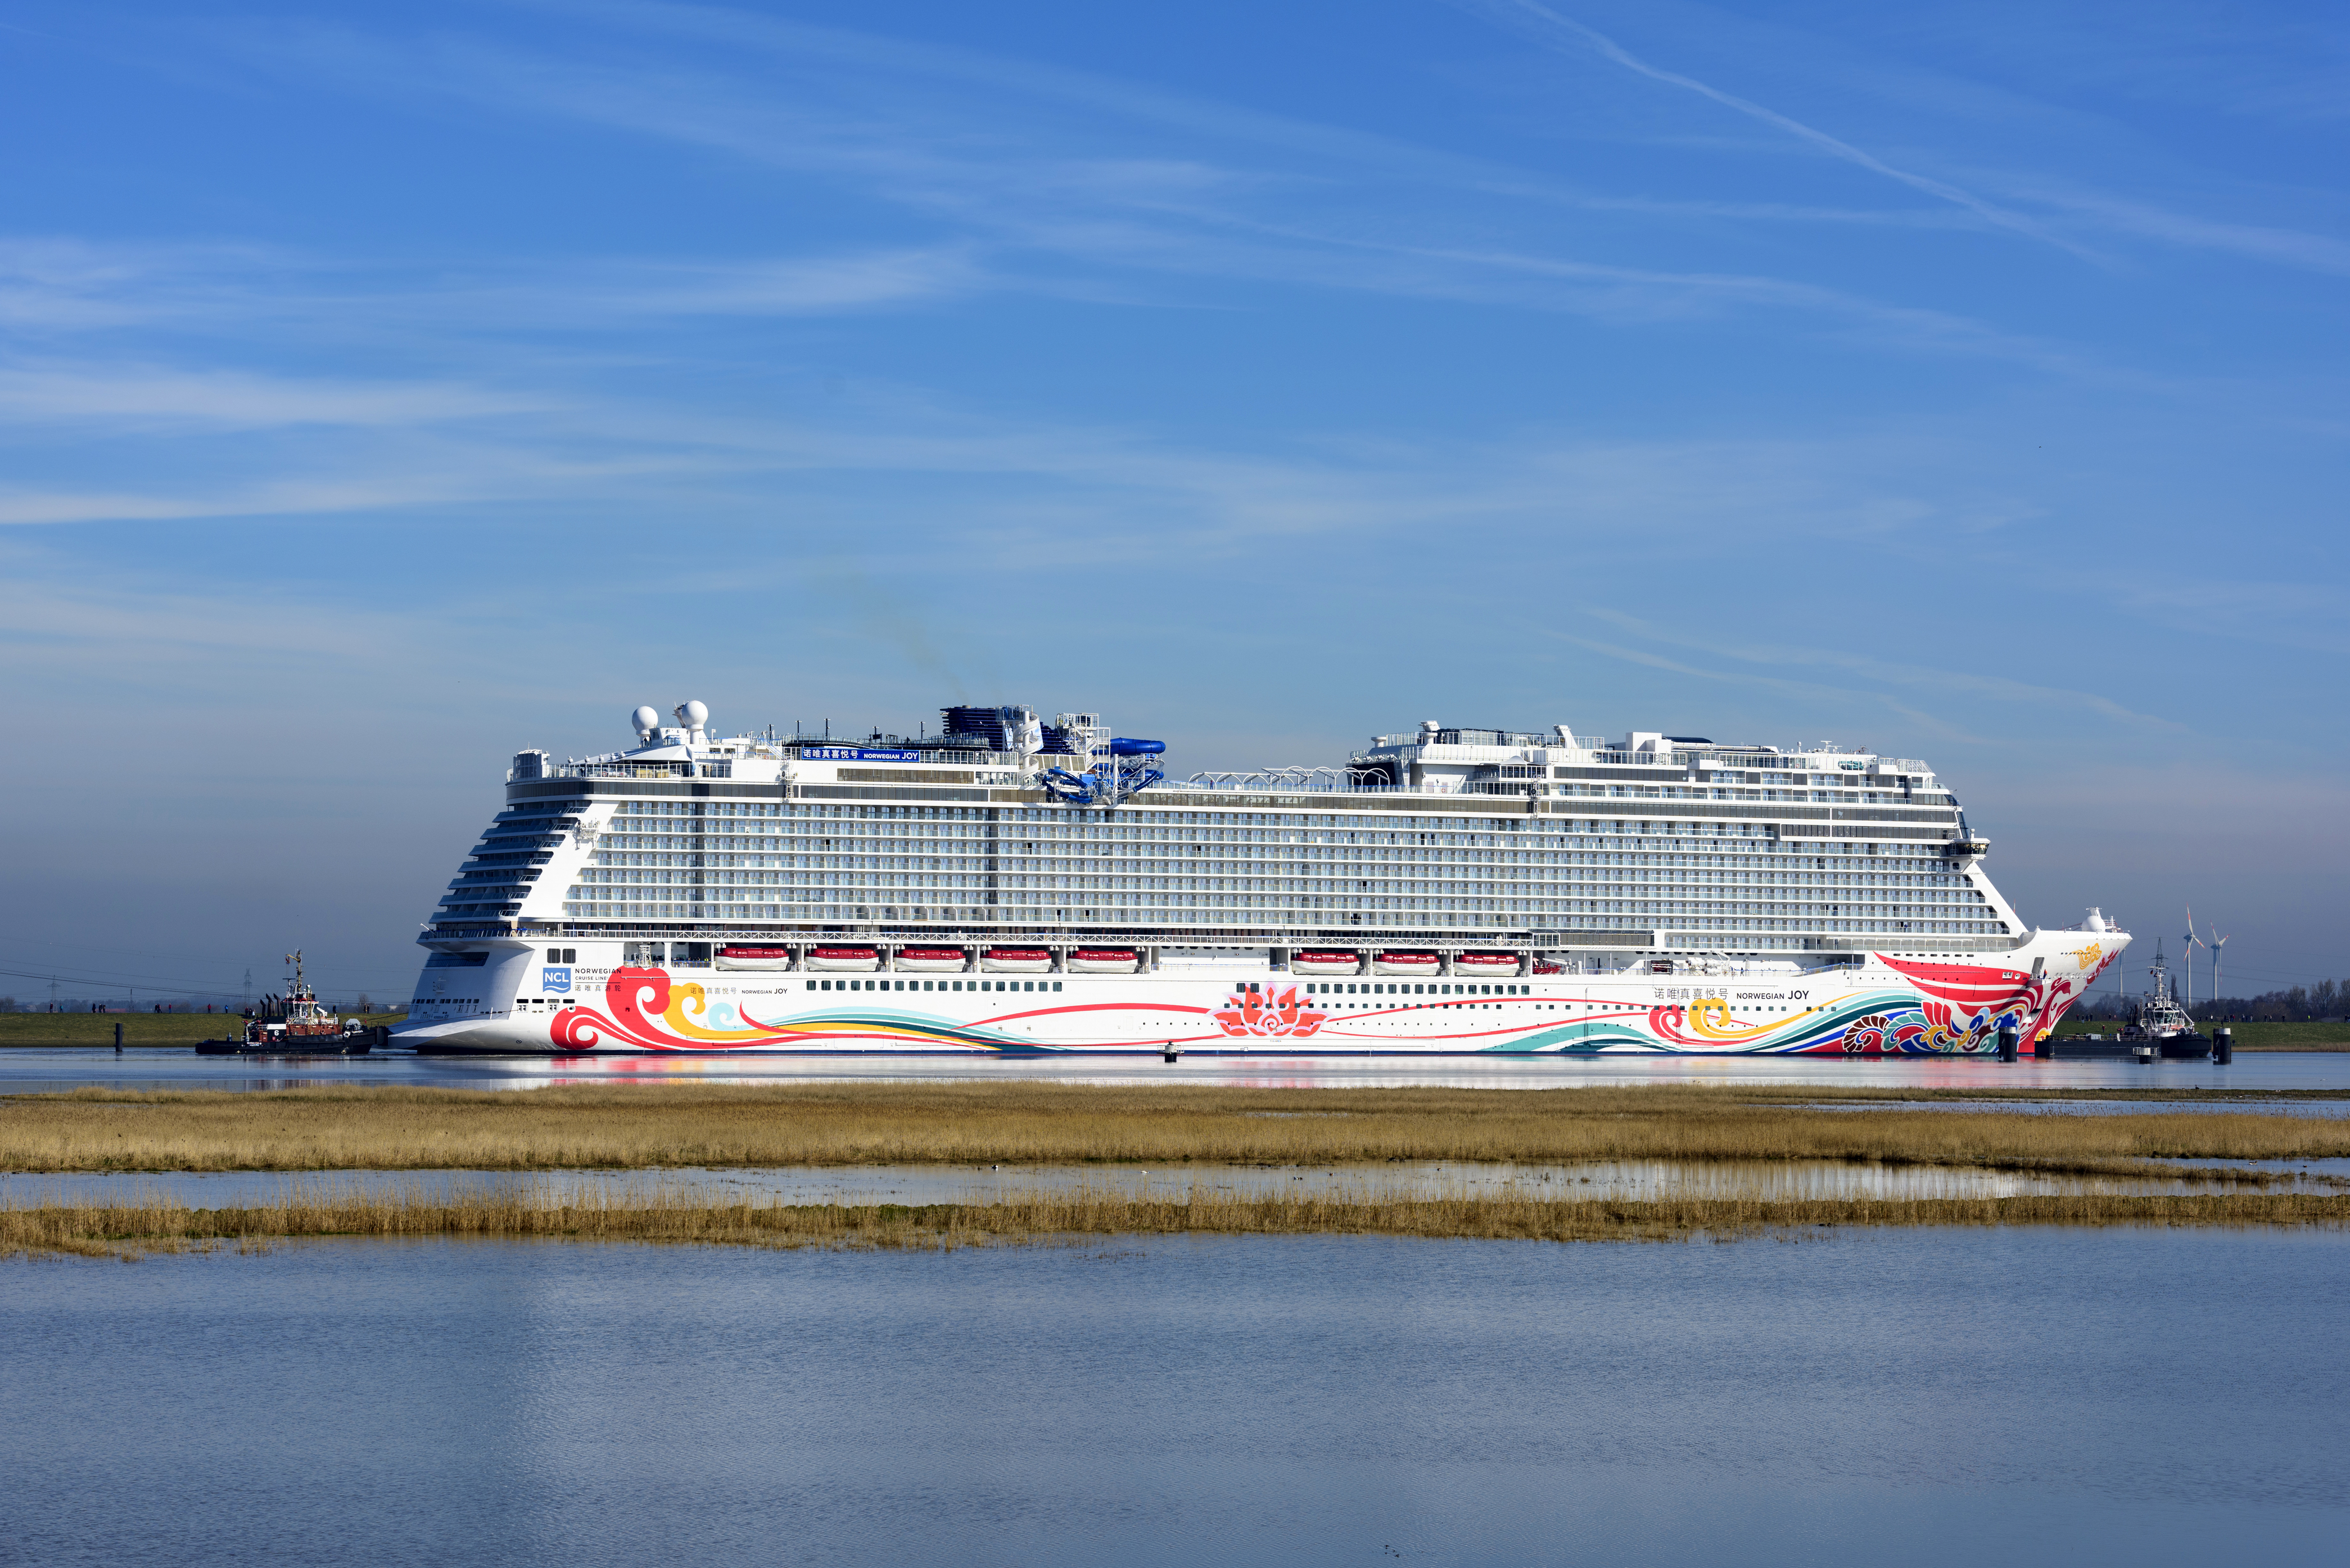 The 3,850-passenger, 168,800-gross-ton Norwegian Joy makes its way up the Ems River from Meyer Werft shipyards in Papenburg, Germany to Eemshaven, Netherlands before it begins sea trials in the North Sea in this 2017 handout photo. (Courtesy/Norwegian Cruise Line)- Original Credit: Norwegian Cruise Line - Original Source: Handout